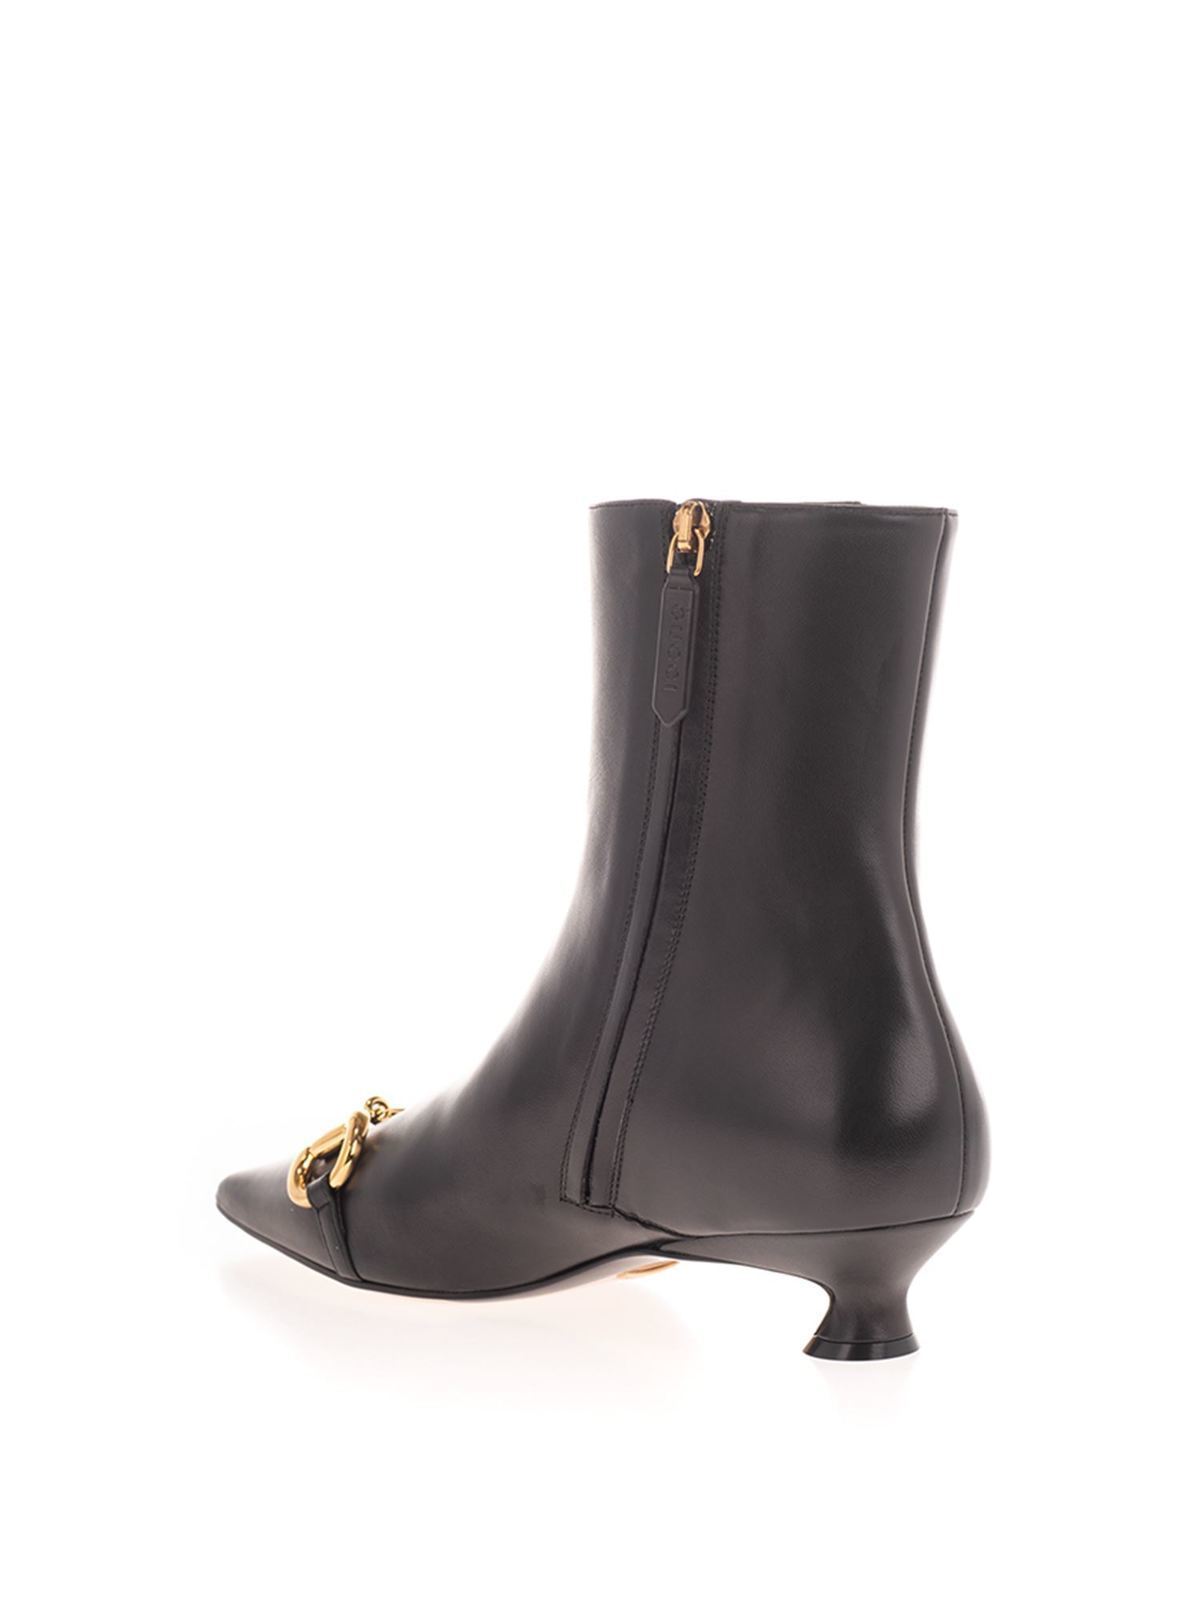 Gucci - Horsebit ankle boots in black 